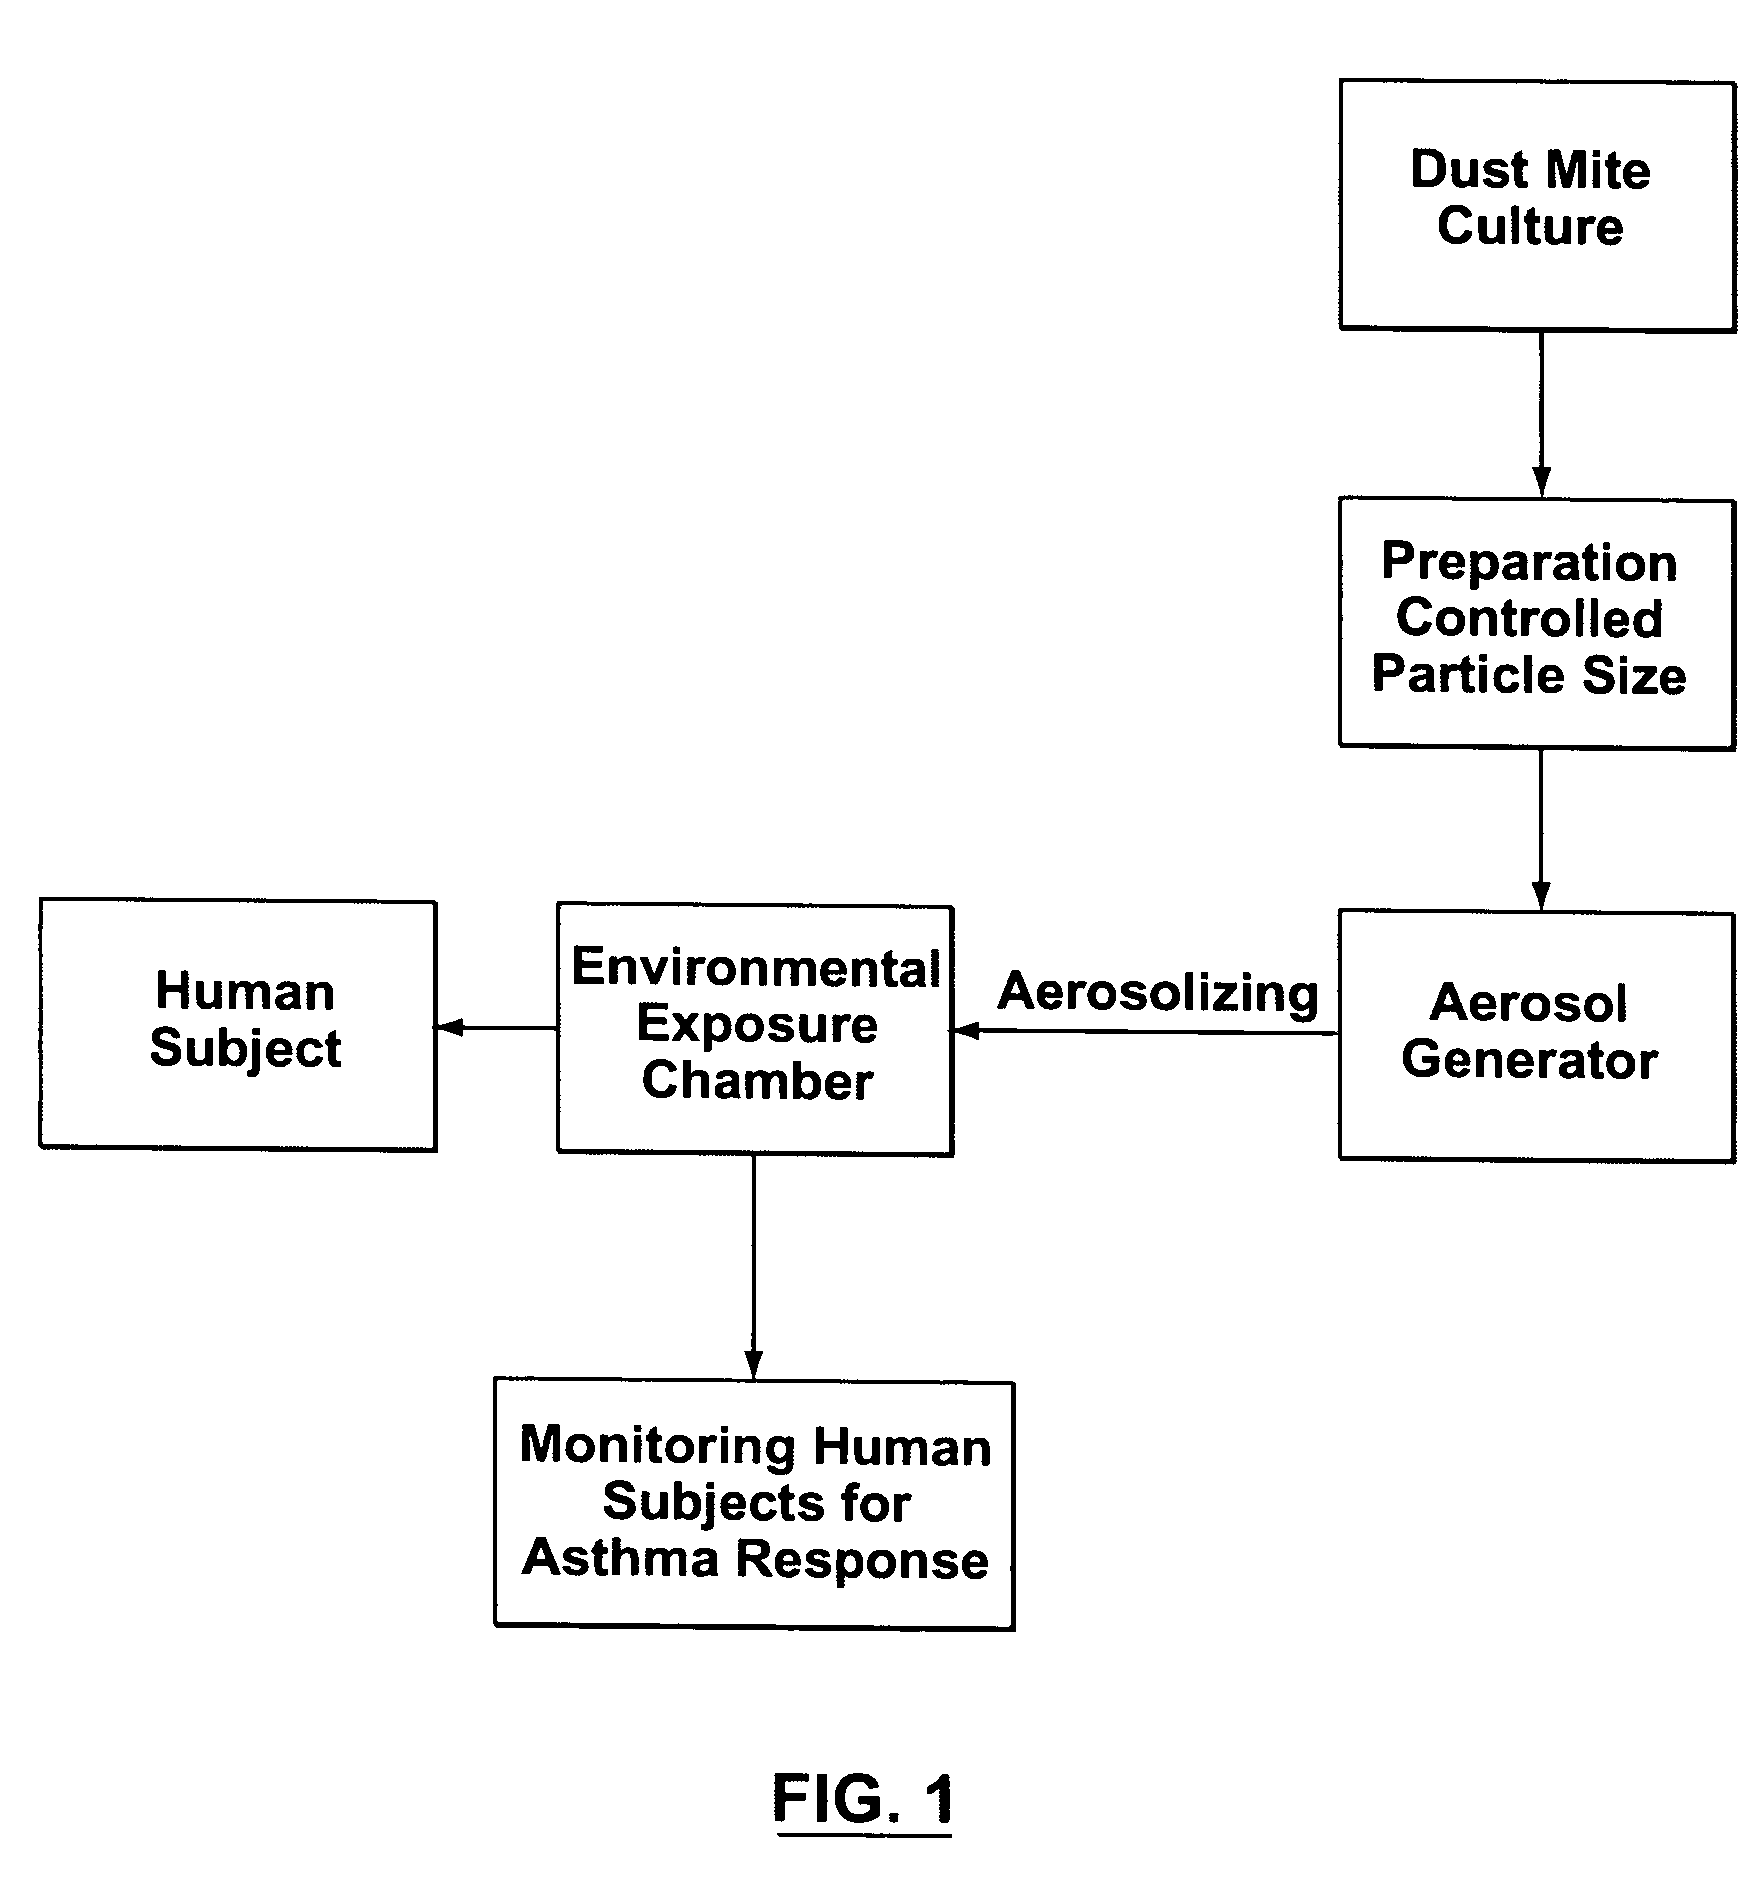 Method, materials and apparatus for investigating asthma using dust mite allergen